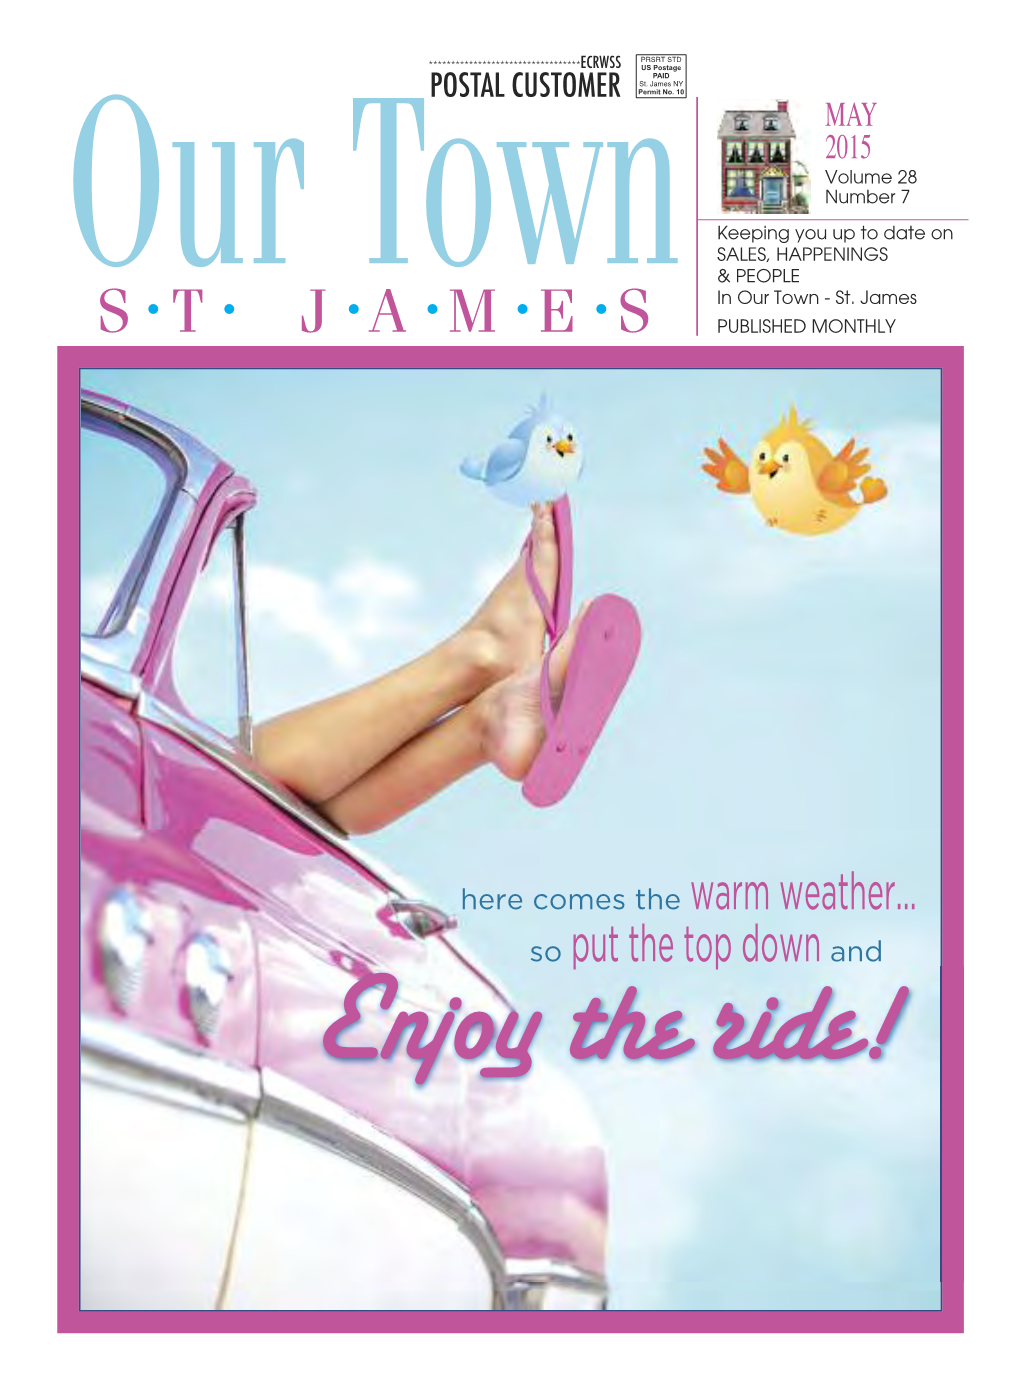 MAY 2015 Volume 28 Number 7 Keeping You up to Date on SALES, HAPPENINGS Our Town & PEOPLE • • • • • • in Our Town - St